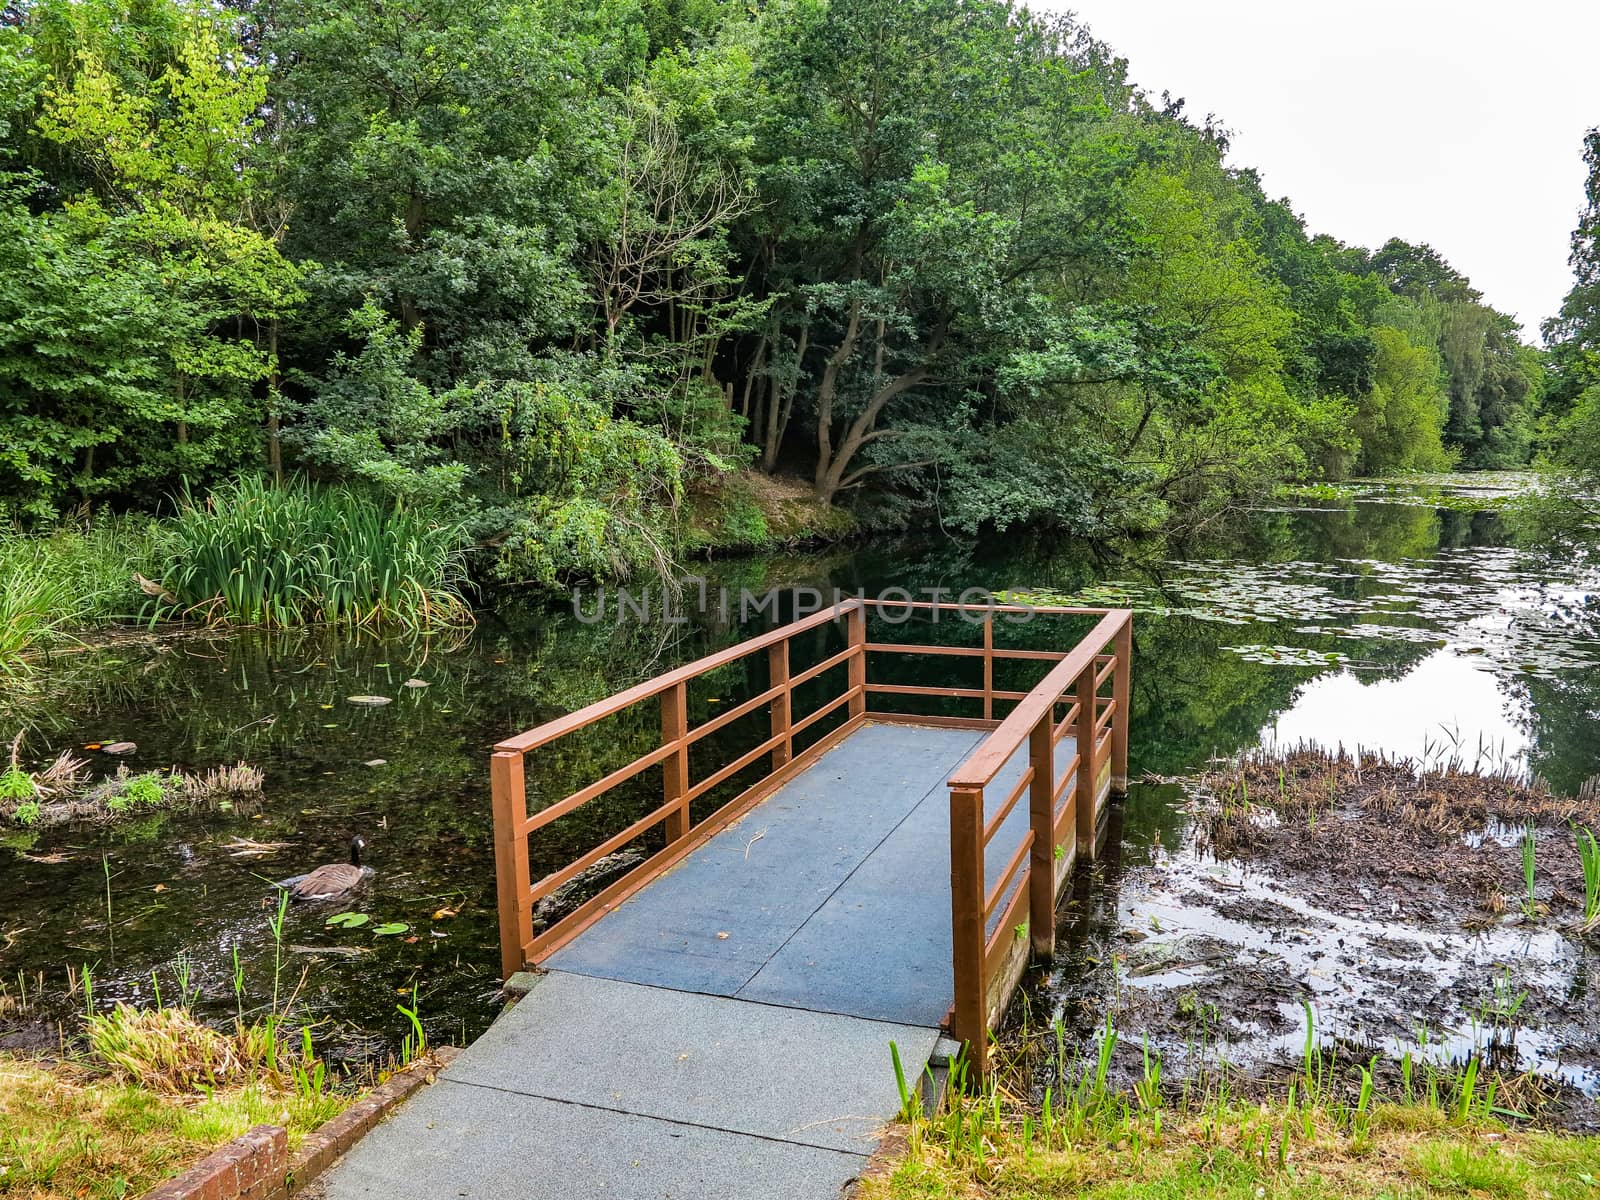 A small dock over a lake with trees surrounding